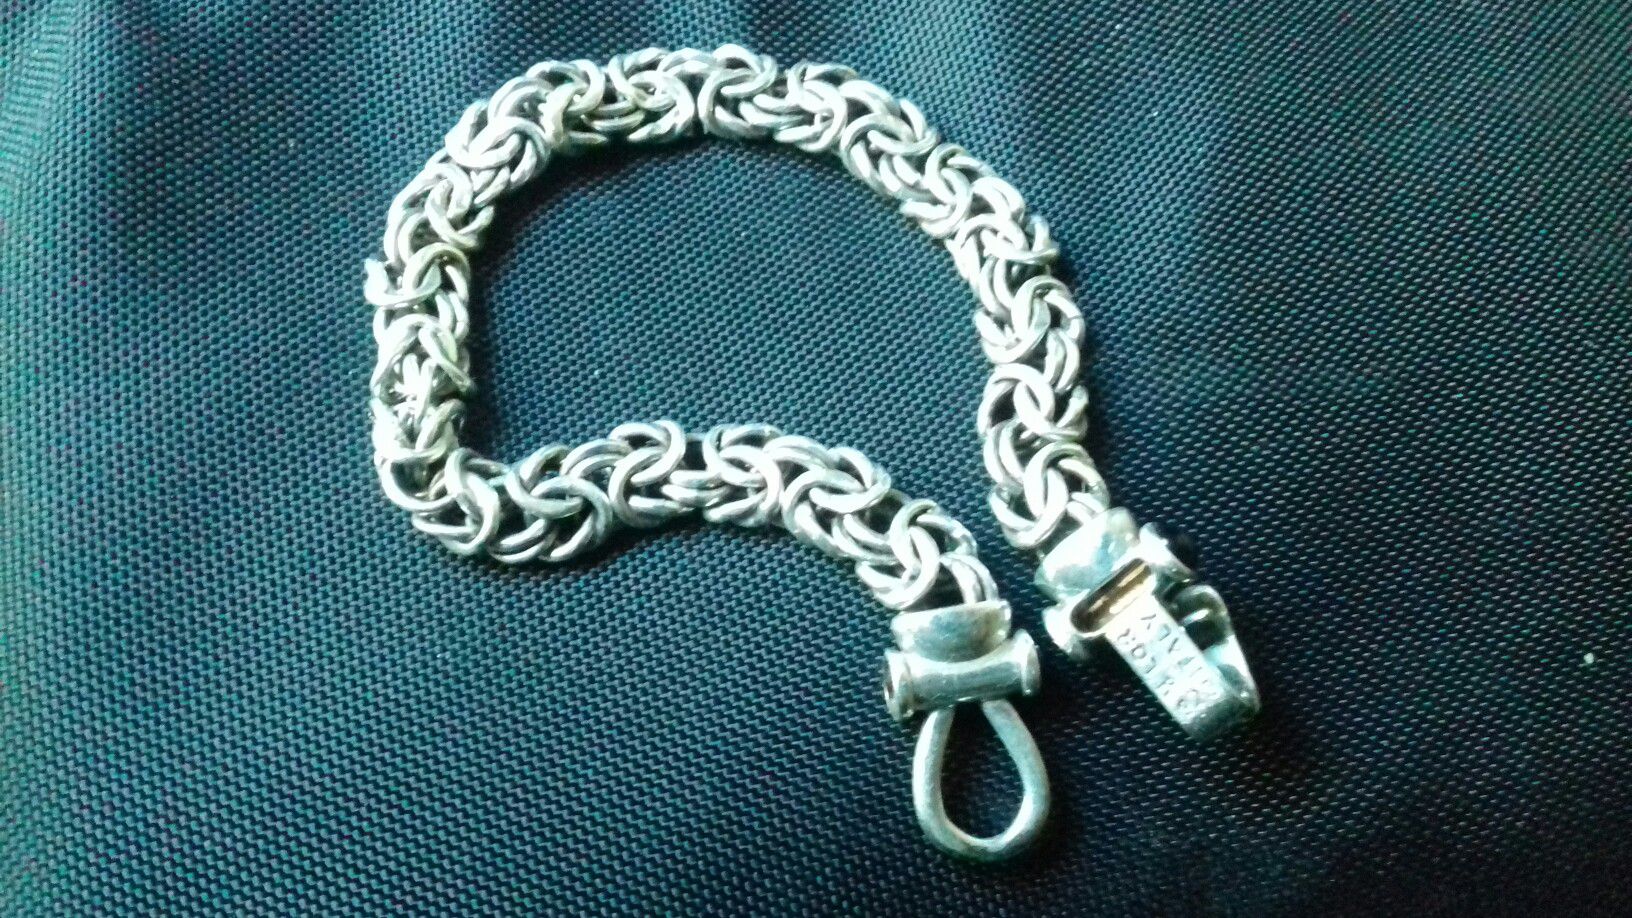 Bracelet silver 925, Used is not new